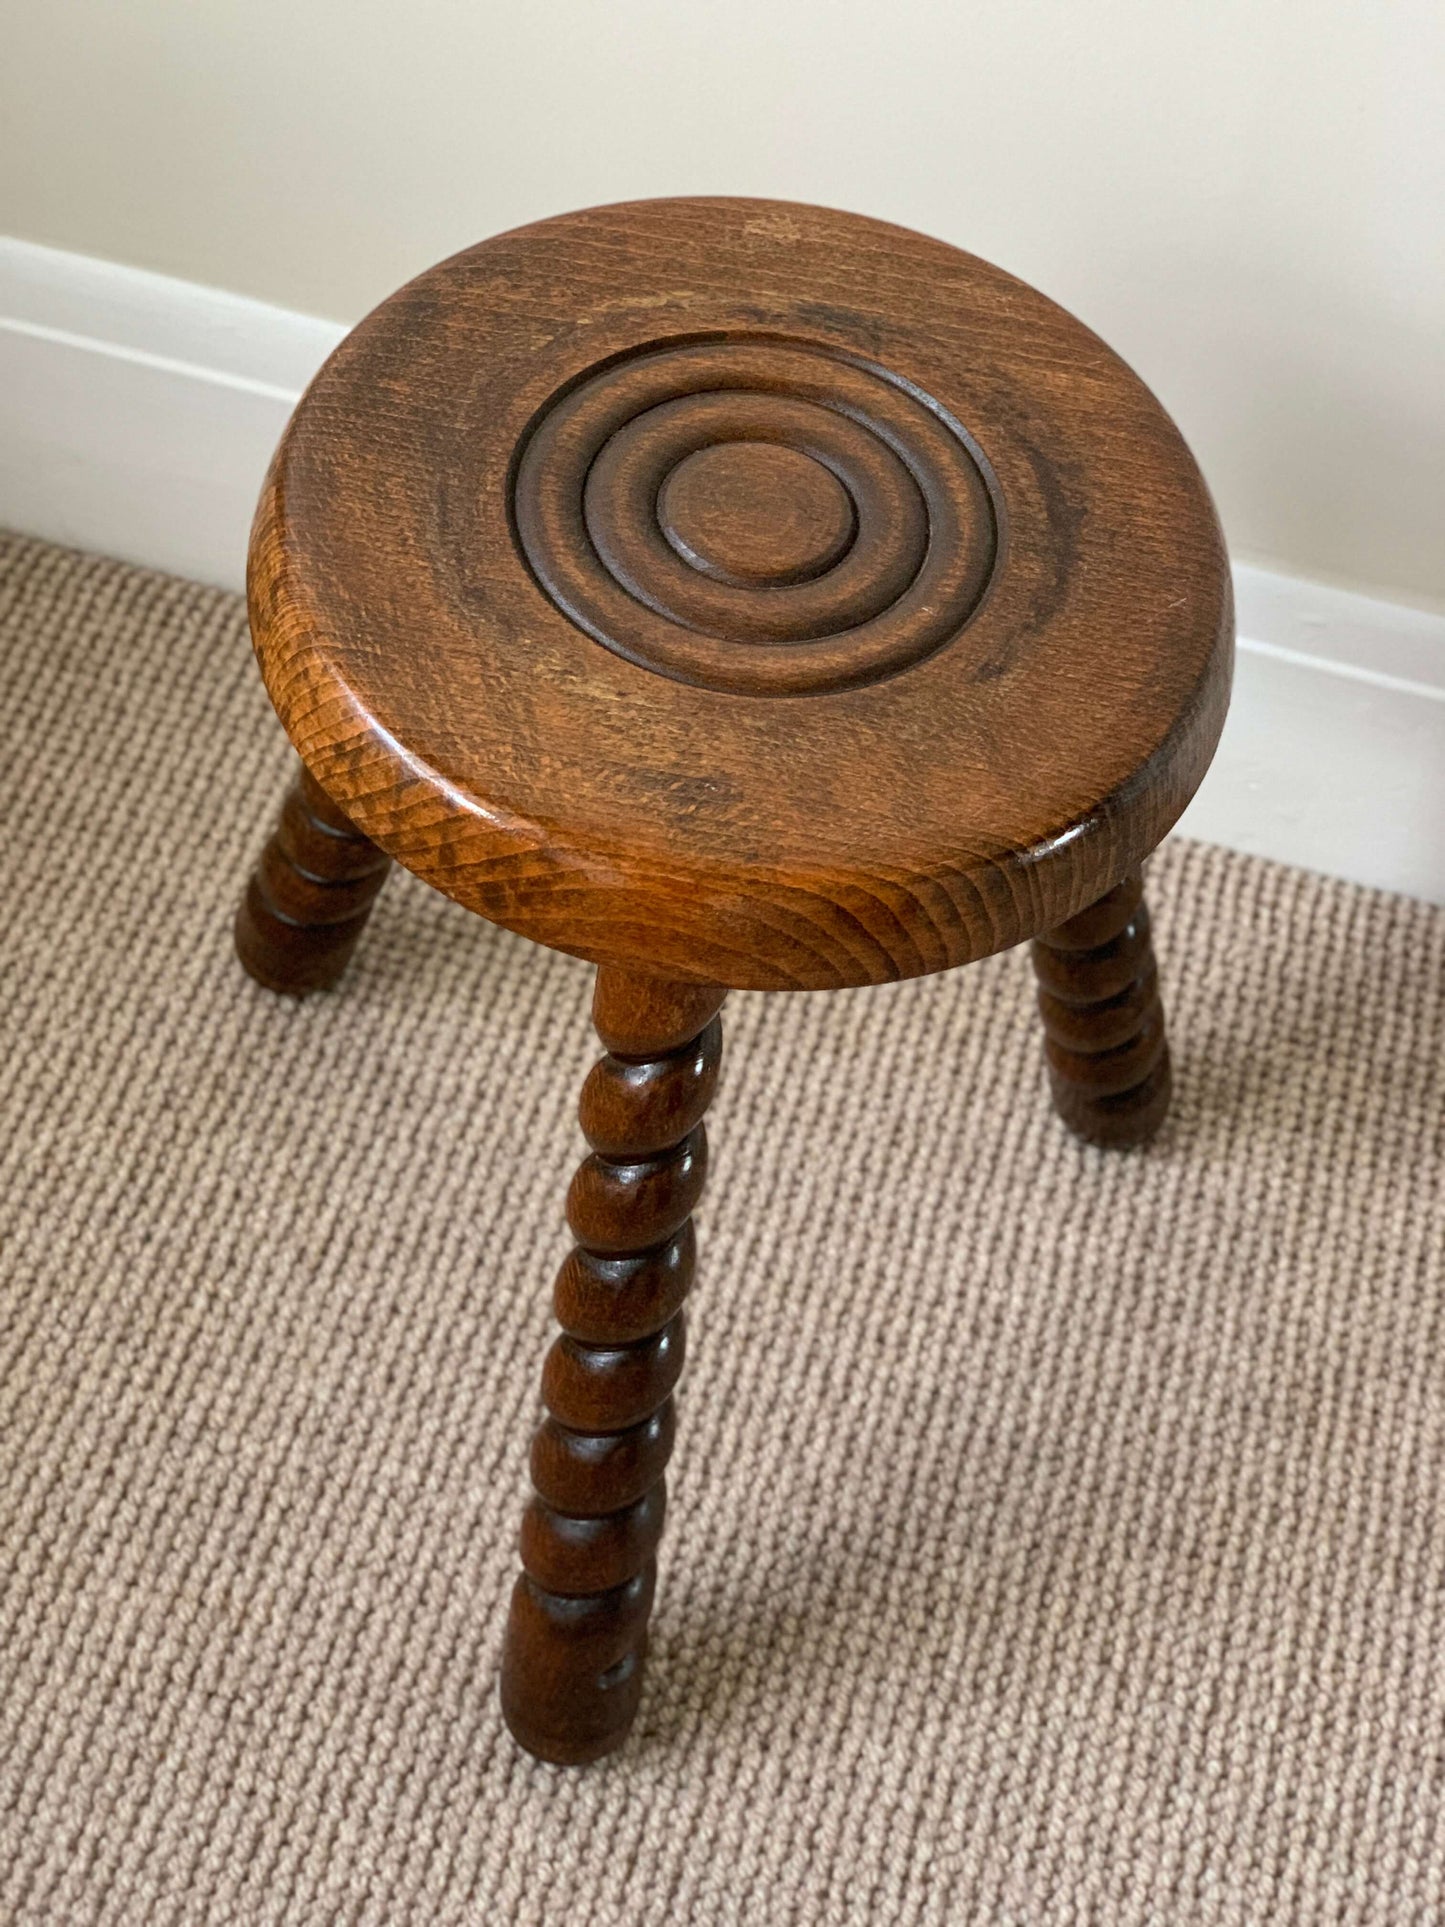 French antique circular stool with twisted legs